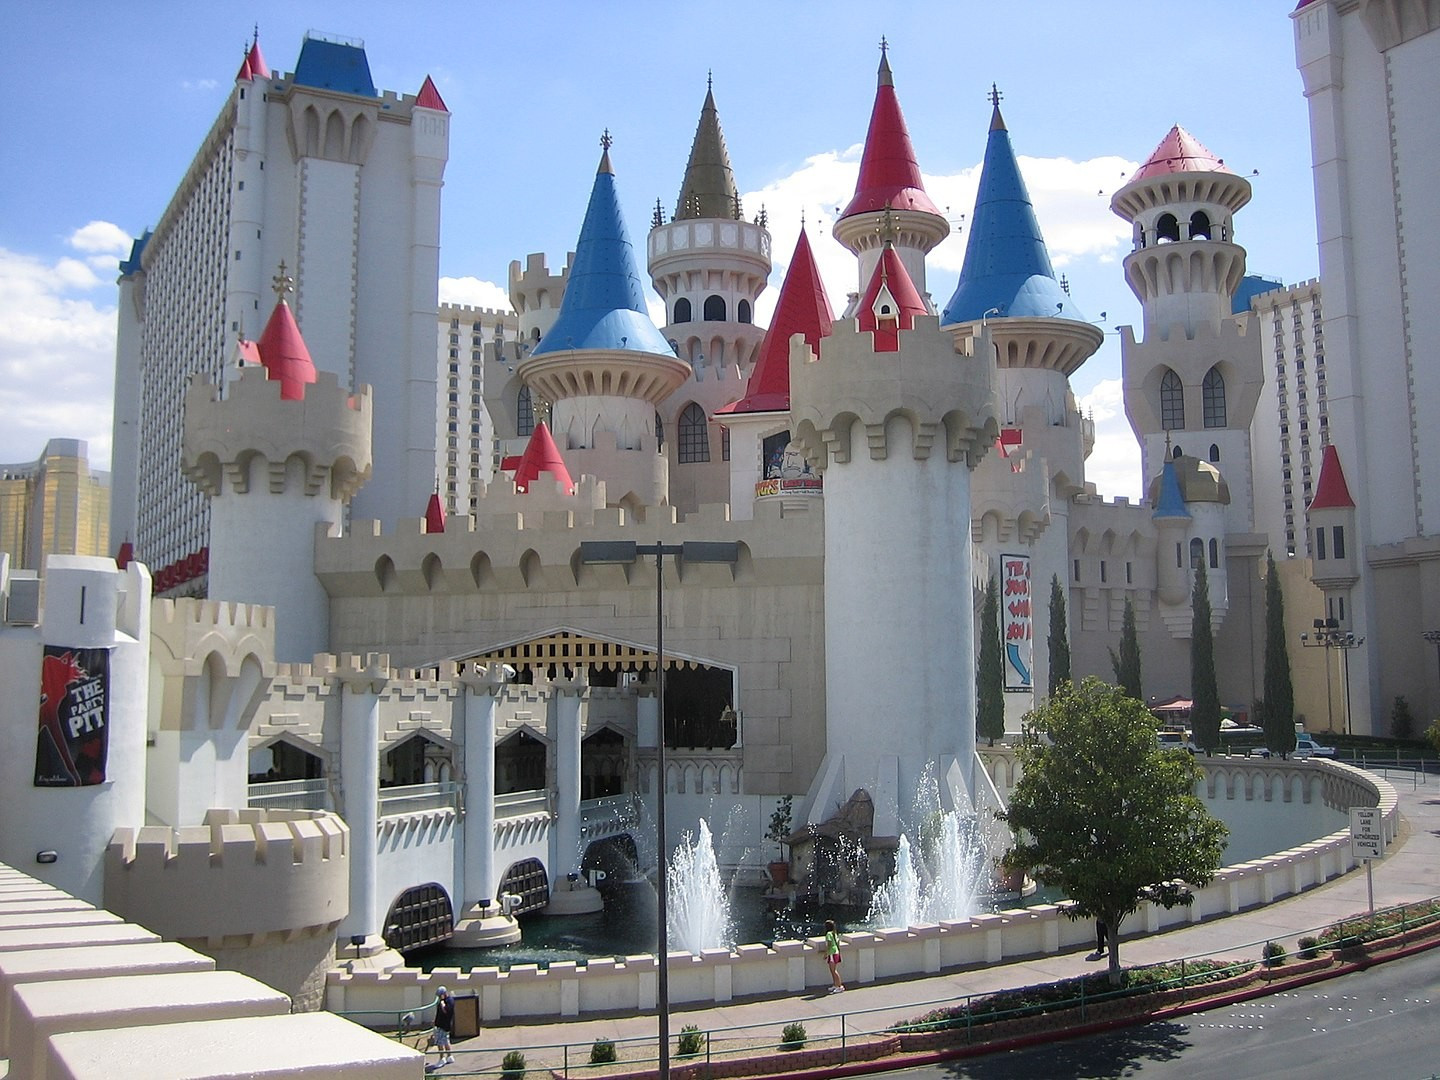 By Brian Whitmarsh - Flickr: 033-072910-Vegas Vacation Excalibur, CC BY 2.0, https://commons.wikimedia.org/w/index.php?curid=13672807